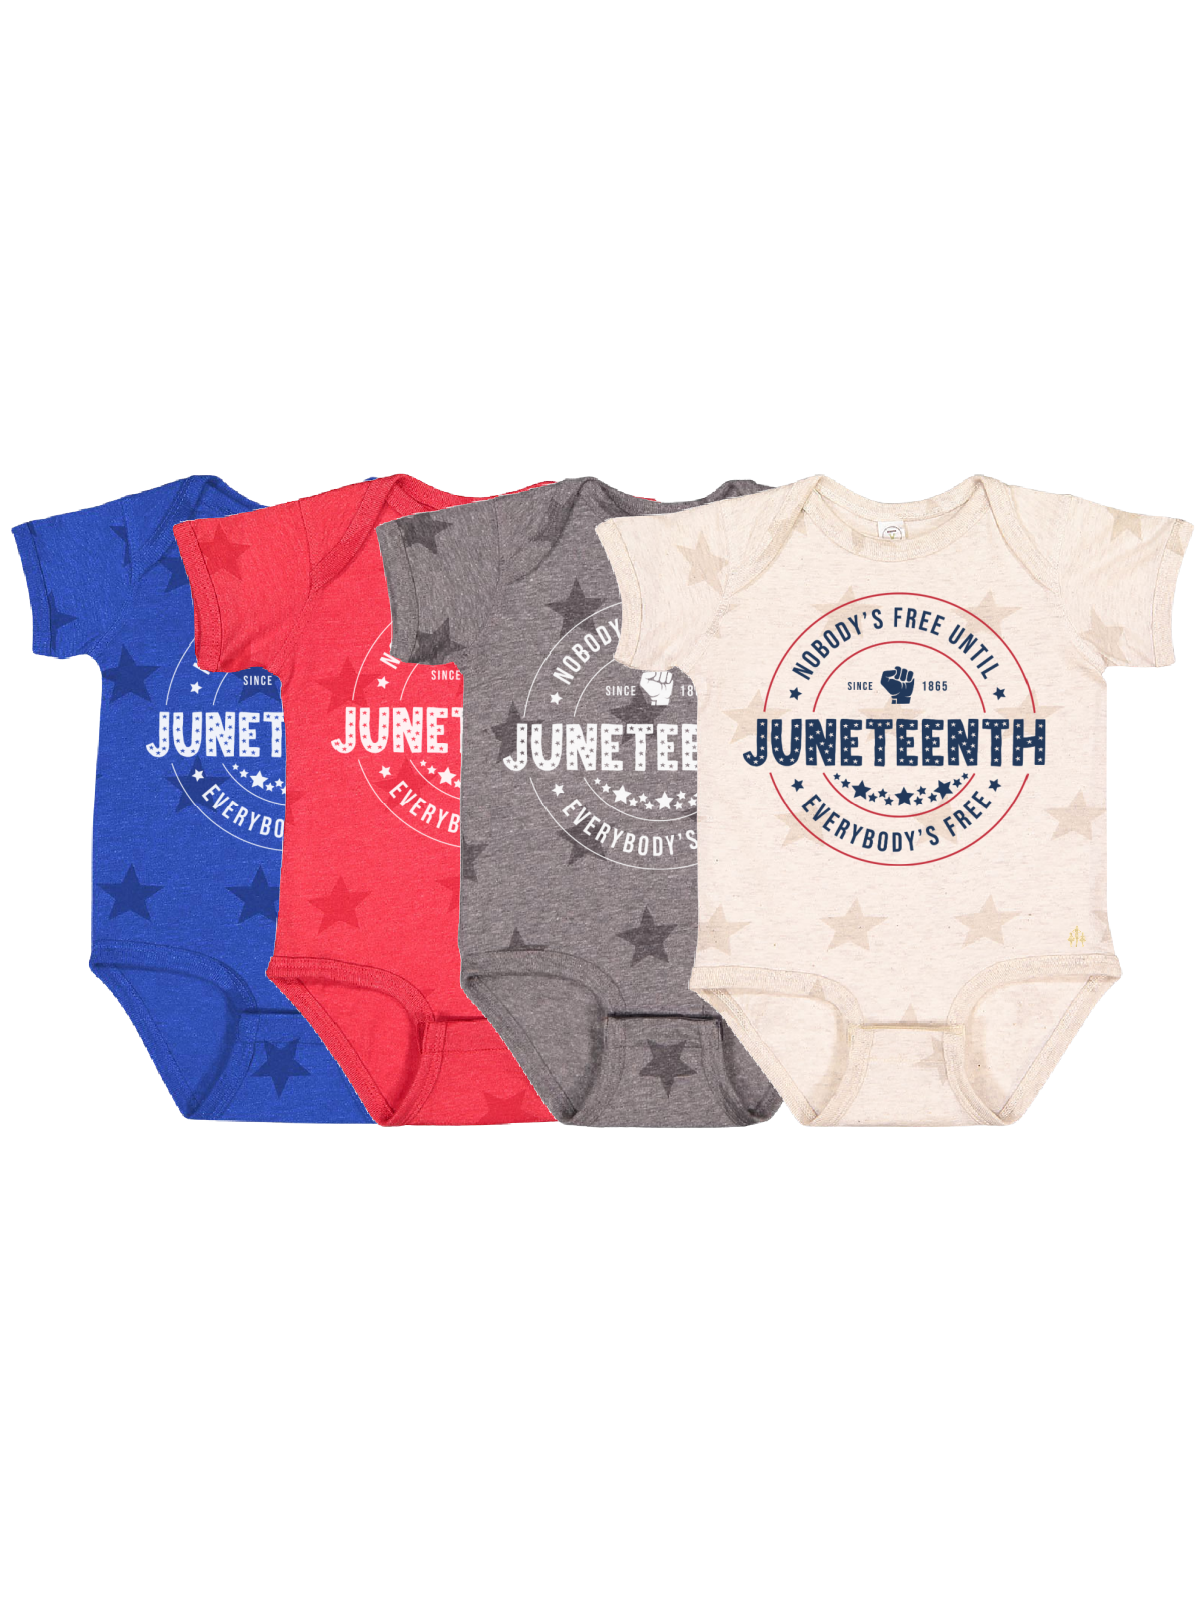 Baby Juneteenth Bodysuit in Red, Blue, Gray and Natural